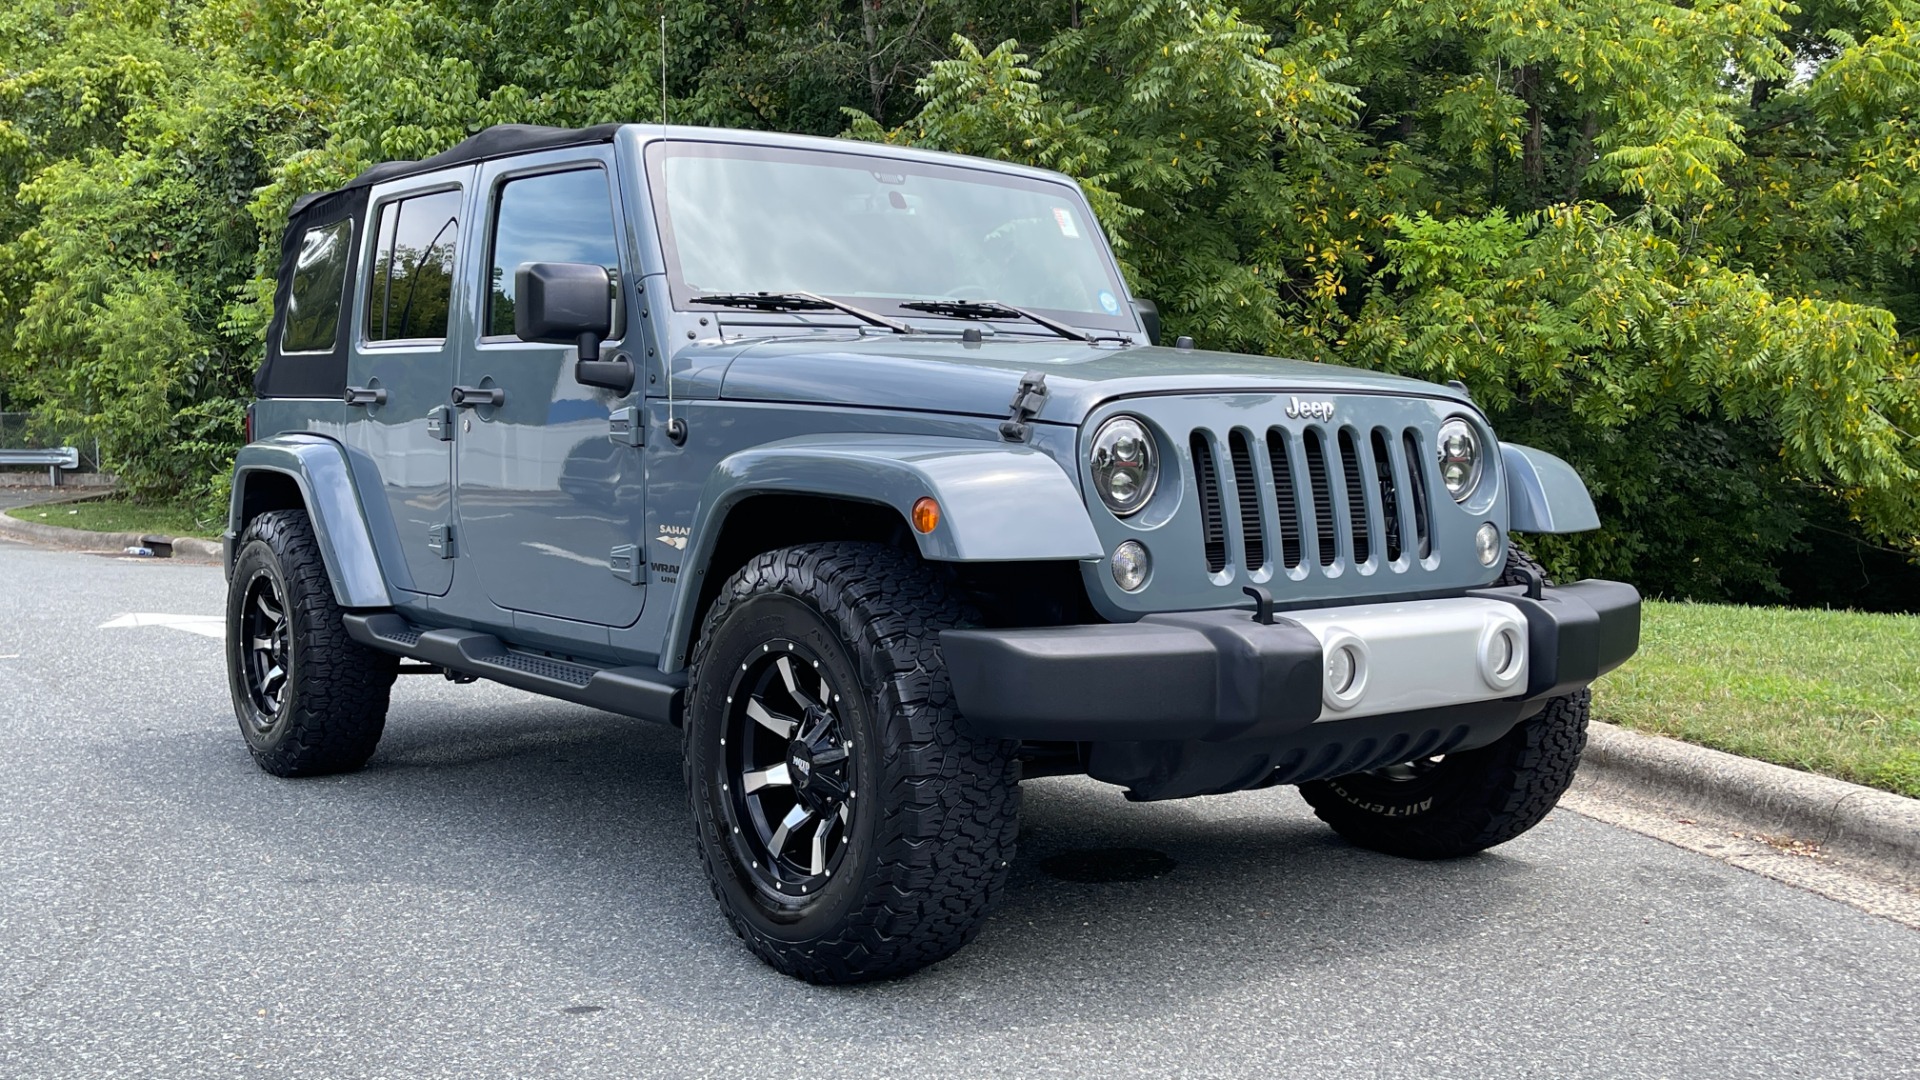 Used 2015 Jeep Wrangler Unlimited SAHARA / UPGRADED WHEELS / SOFT TOP / LED HEADLIGHTS / MAX TOW PACKAGE for sale Sold at Formula Imports in Charlotte NC 28227 2